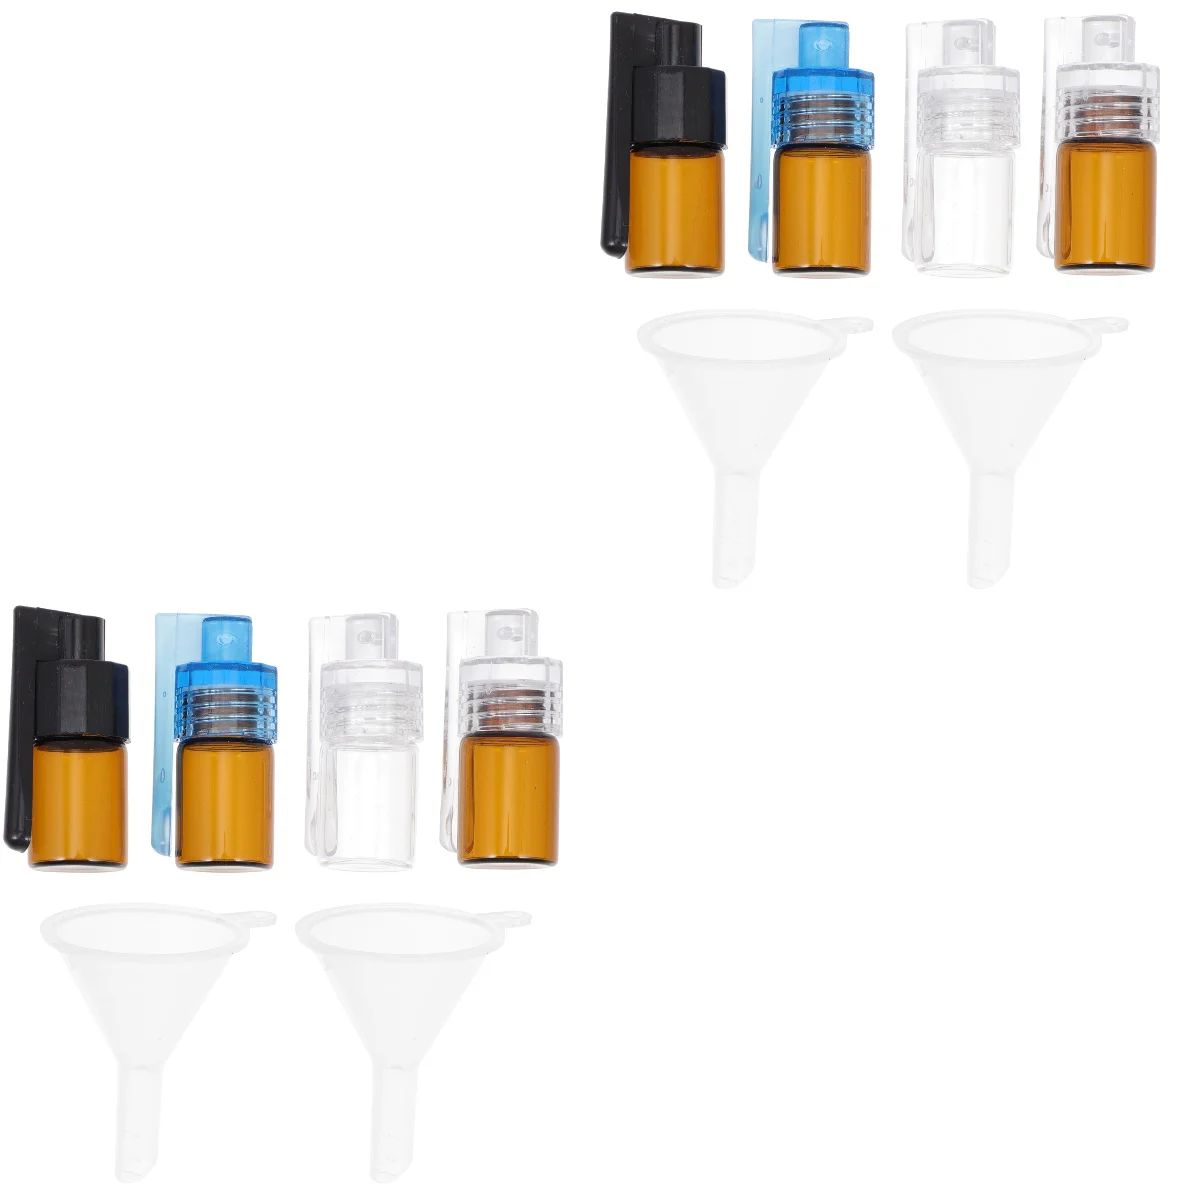 

12pcs Snuff Bottle with Funnel Glass Bottle Glass Container with Spoon Funnel Small Pocket Glass Vial